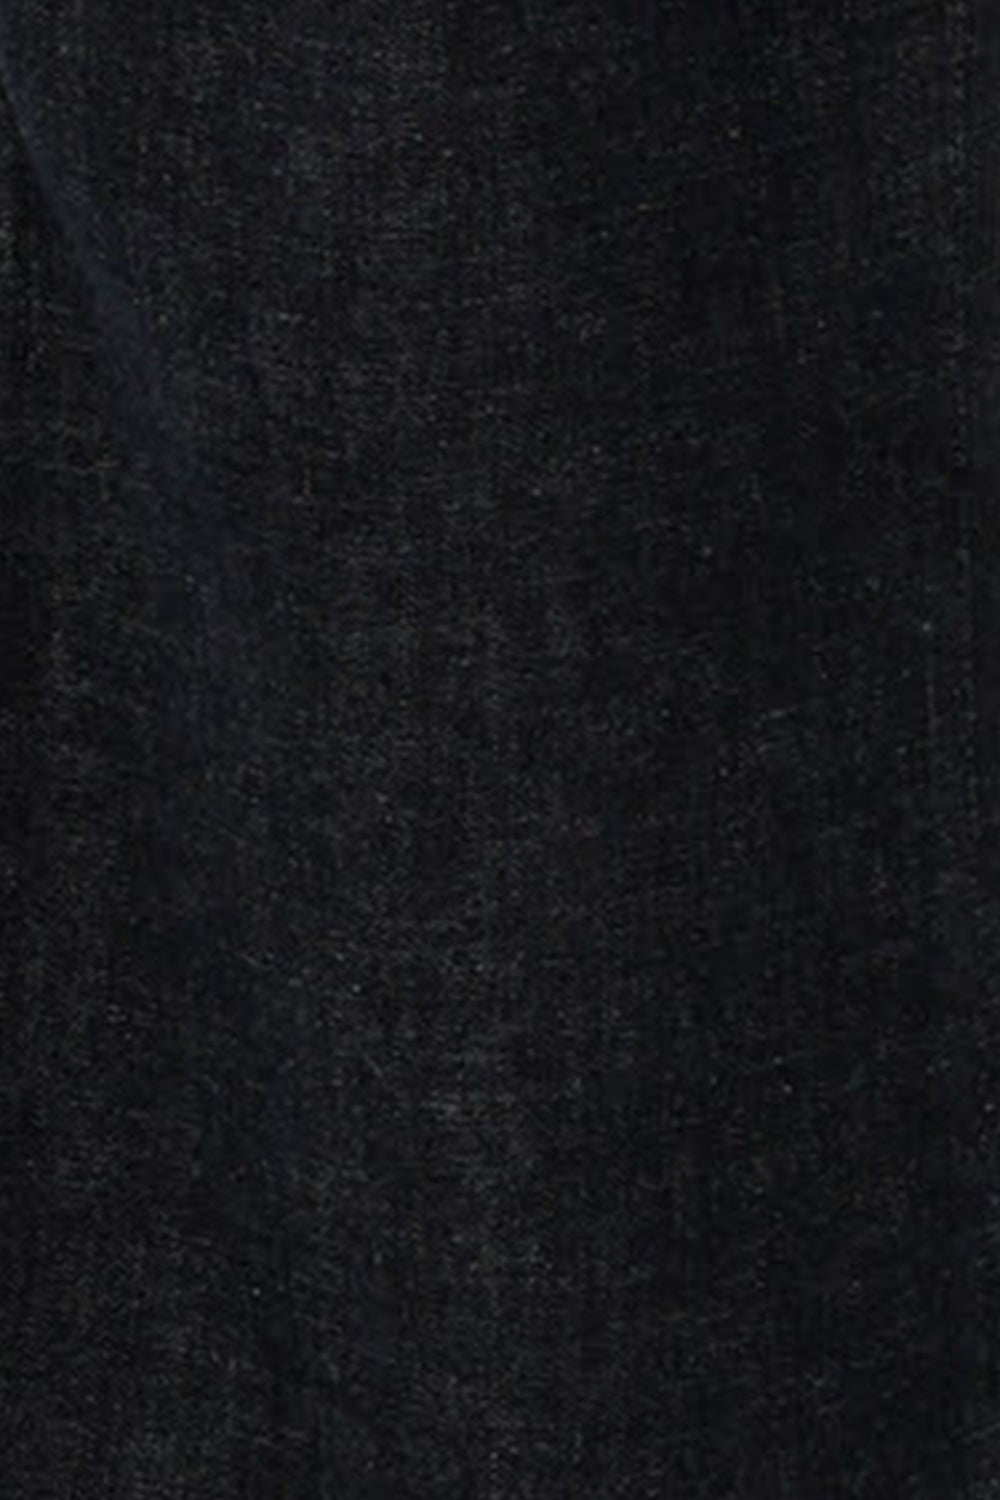 Swatch of ethical and sustainable, organic cotton denim in midnight blue used by Australian and New Zealand women's clothing label, L&F to make tailored jeans wear in sizes 8 to 24.